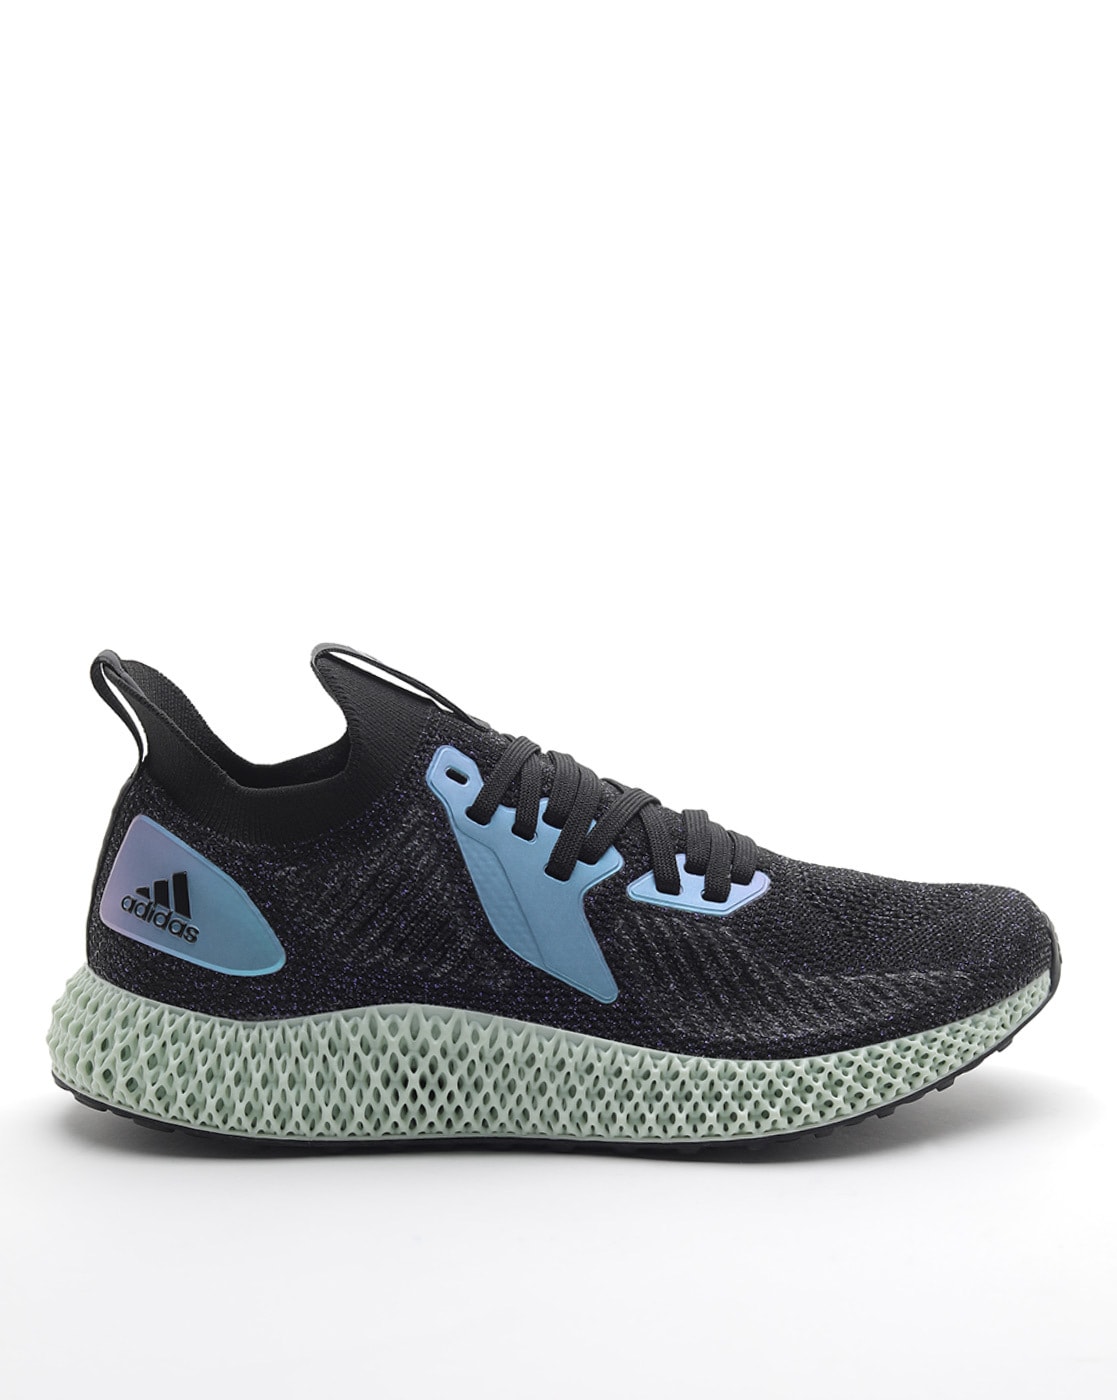 adidas x Star Wars Alphaedge 4D shoes review: Strong in the Dark Side |  Digit